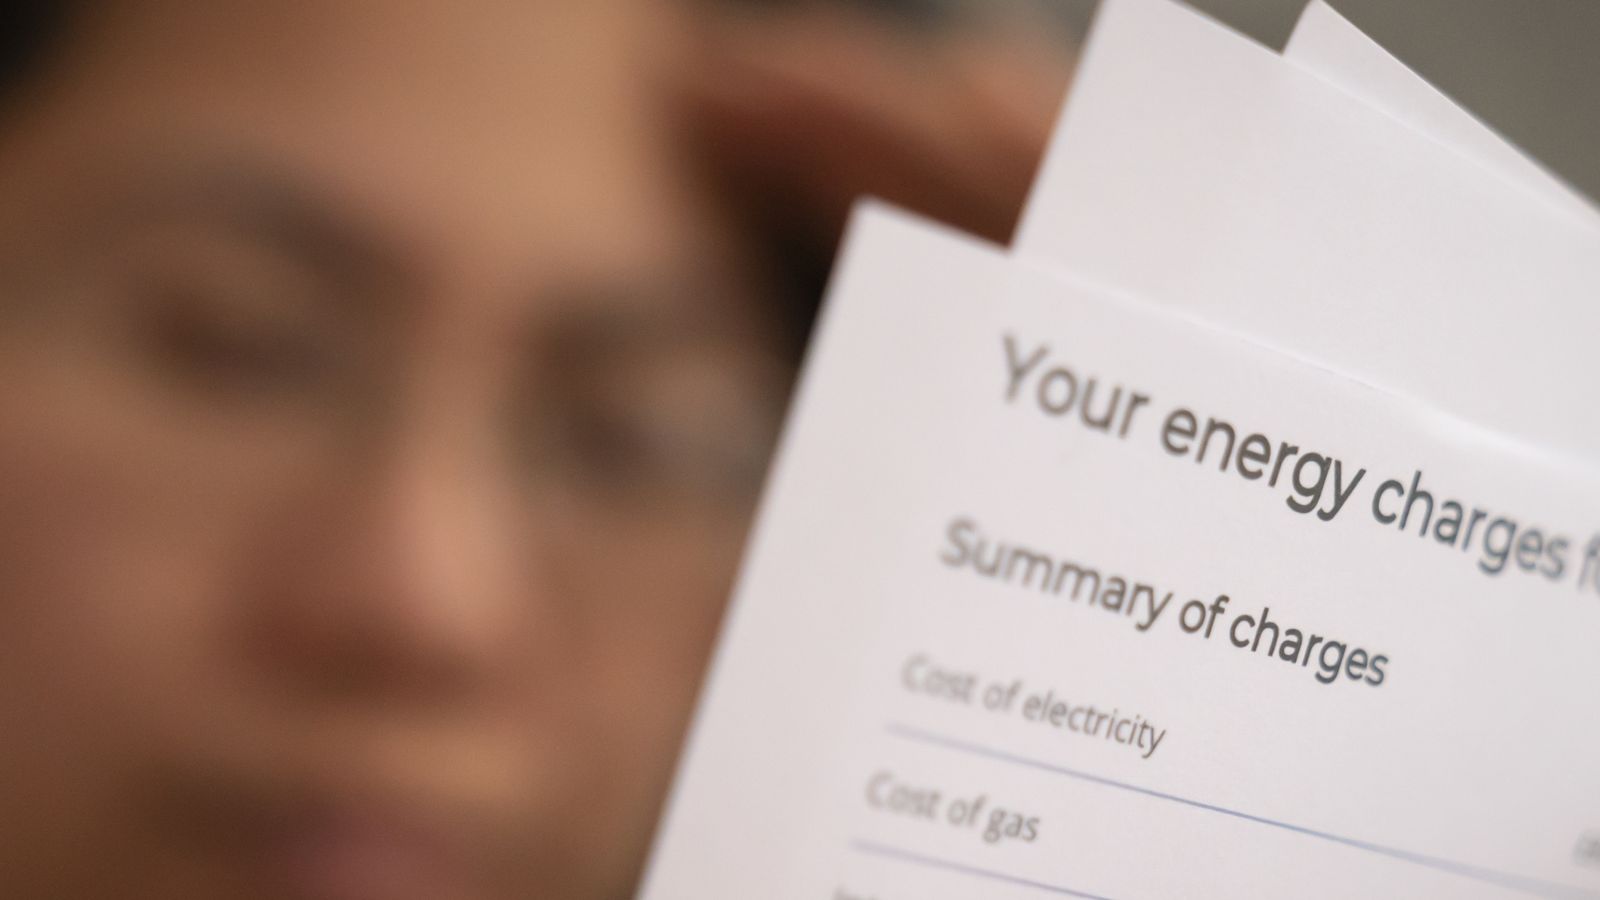 Households paying £94 extra on energy bills. Most of it goes to the government as indirect taxes and enriching the energy companies.